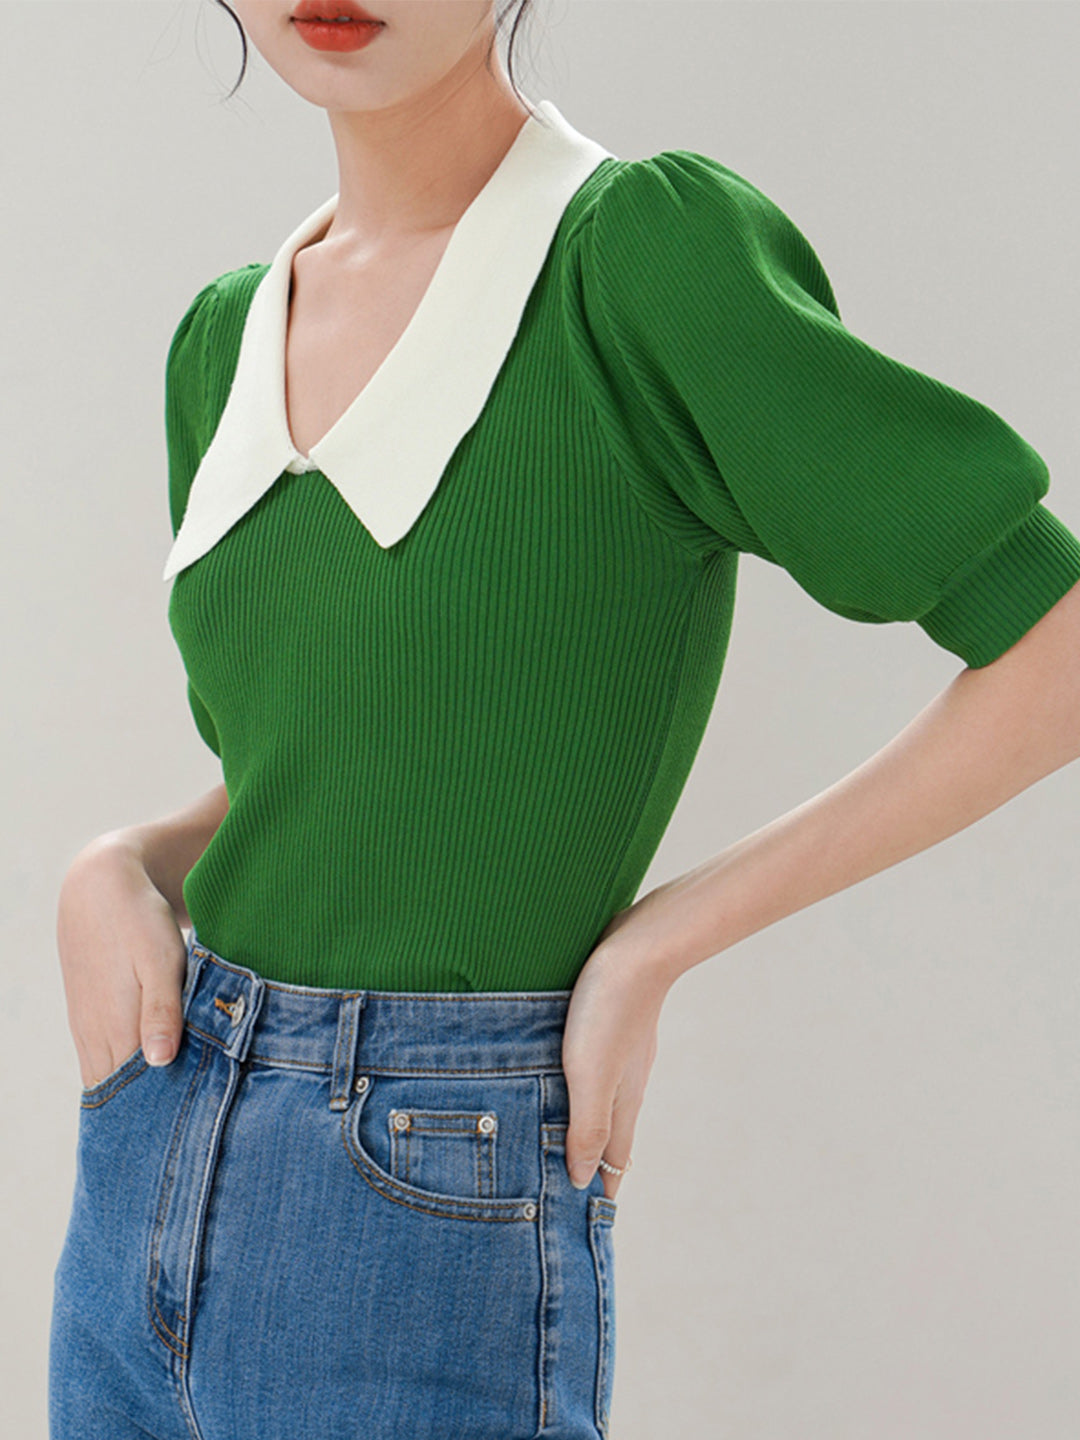 Alexis Retro Lapel Puff Sleeve Knitted Tops-Green